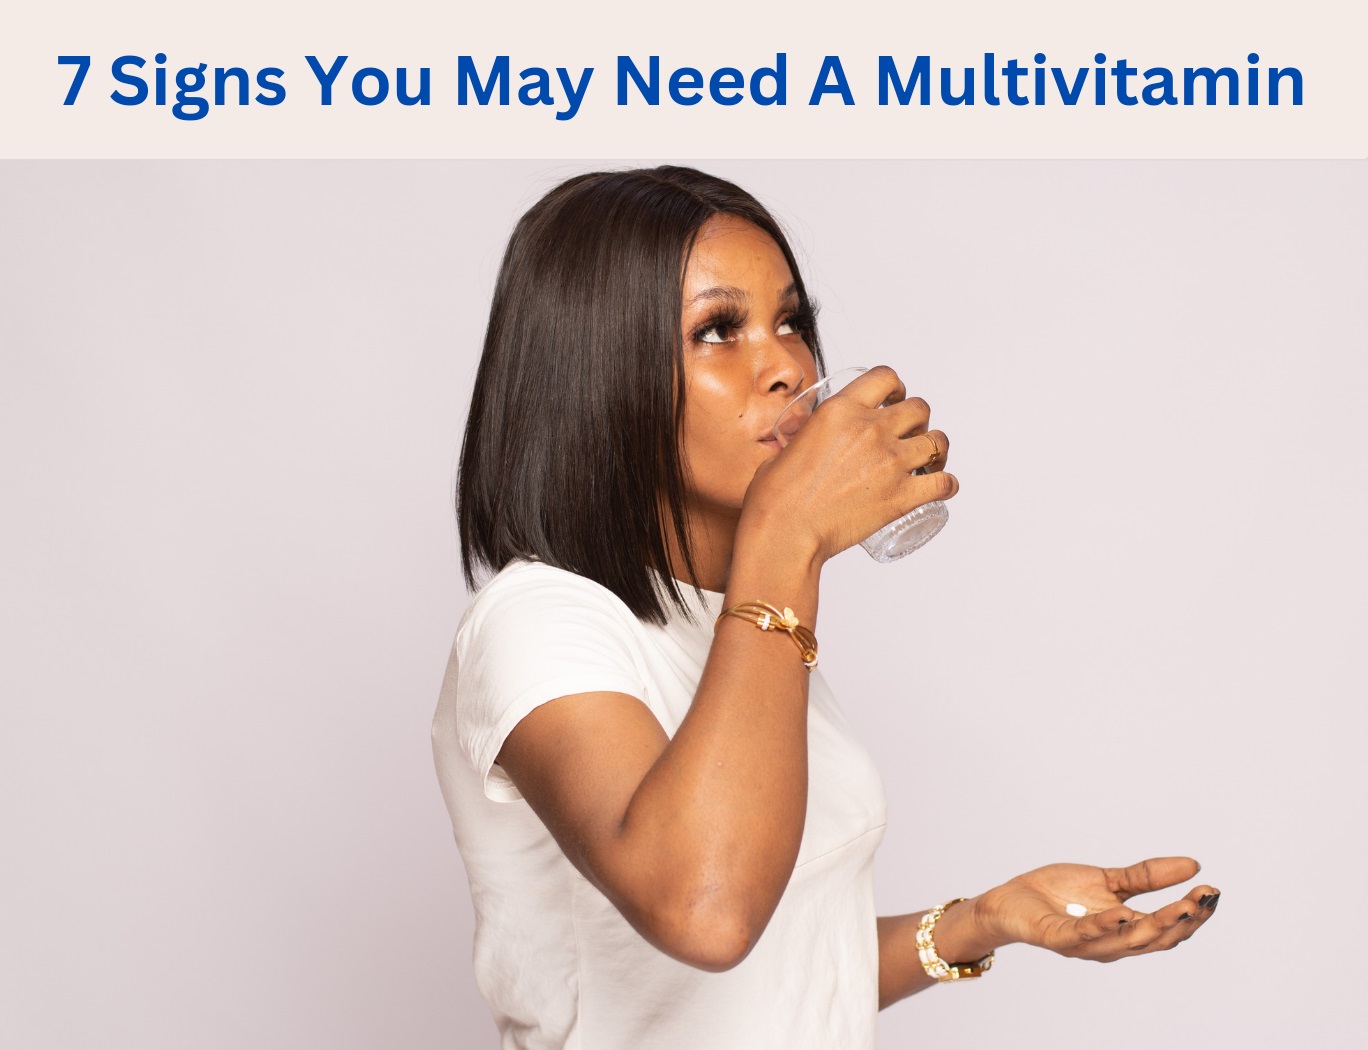 Signs you may need a multivitamin